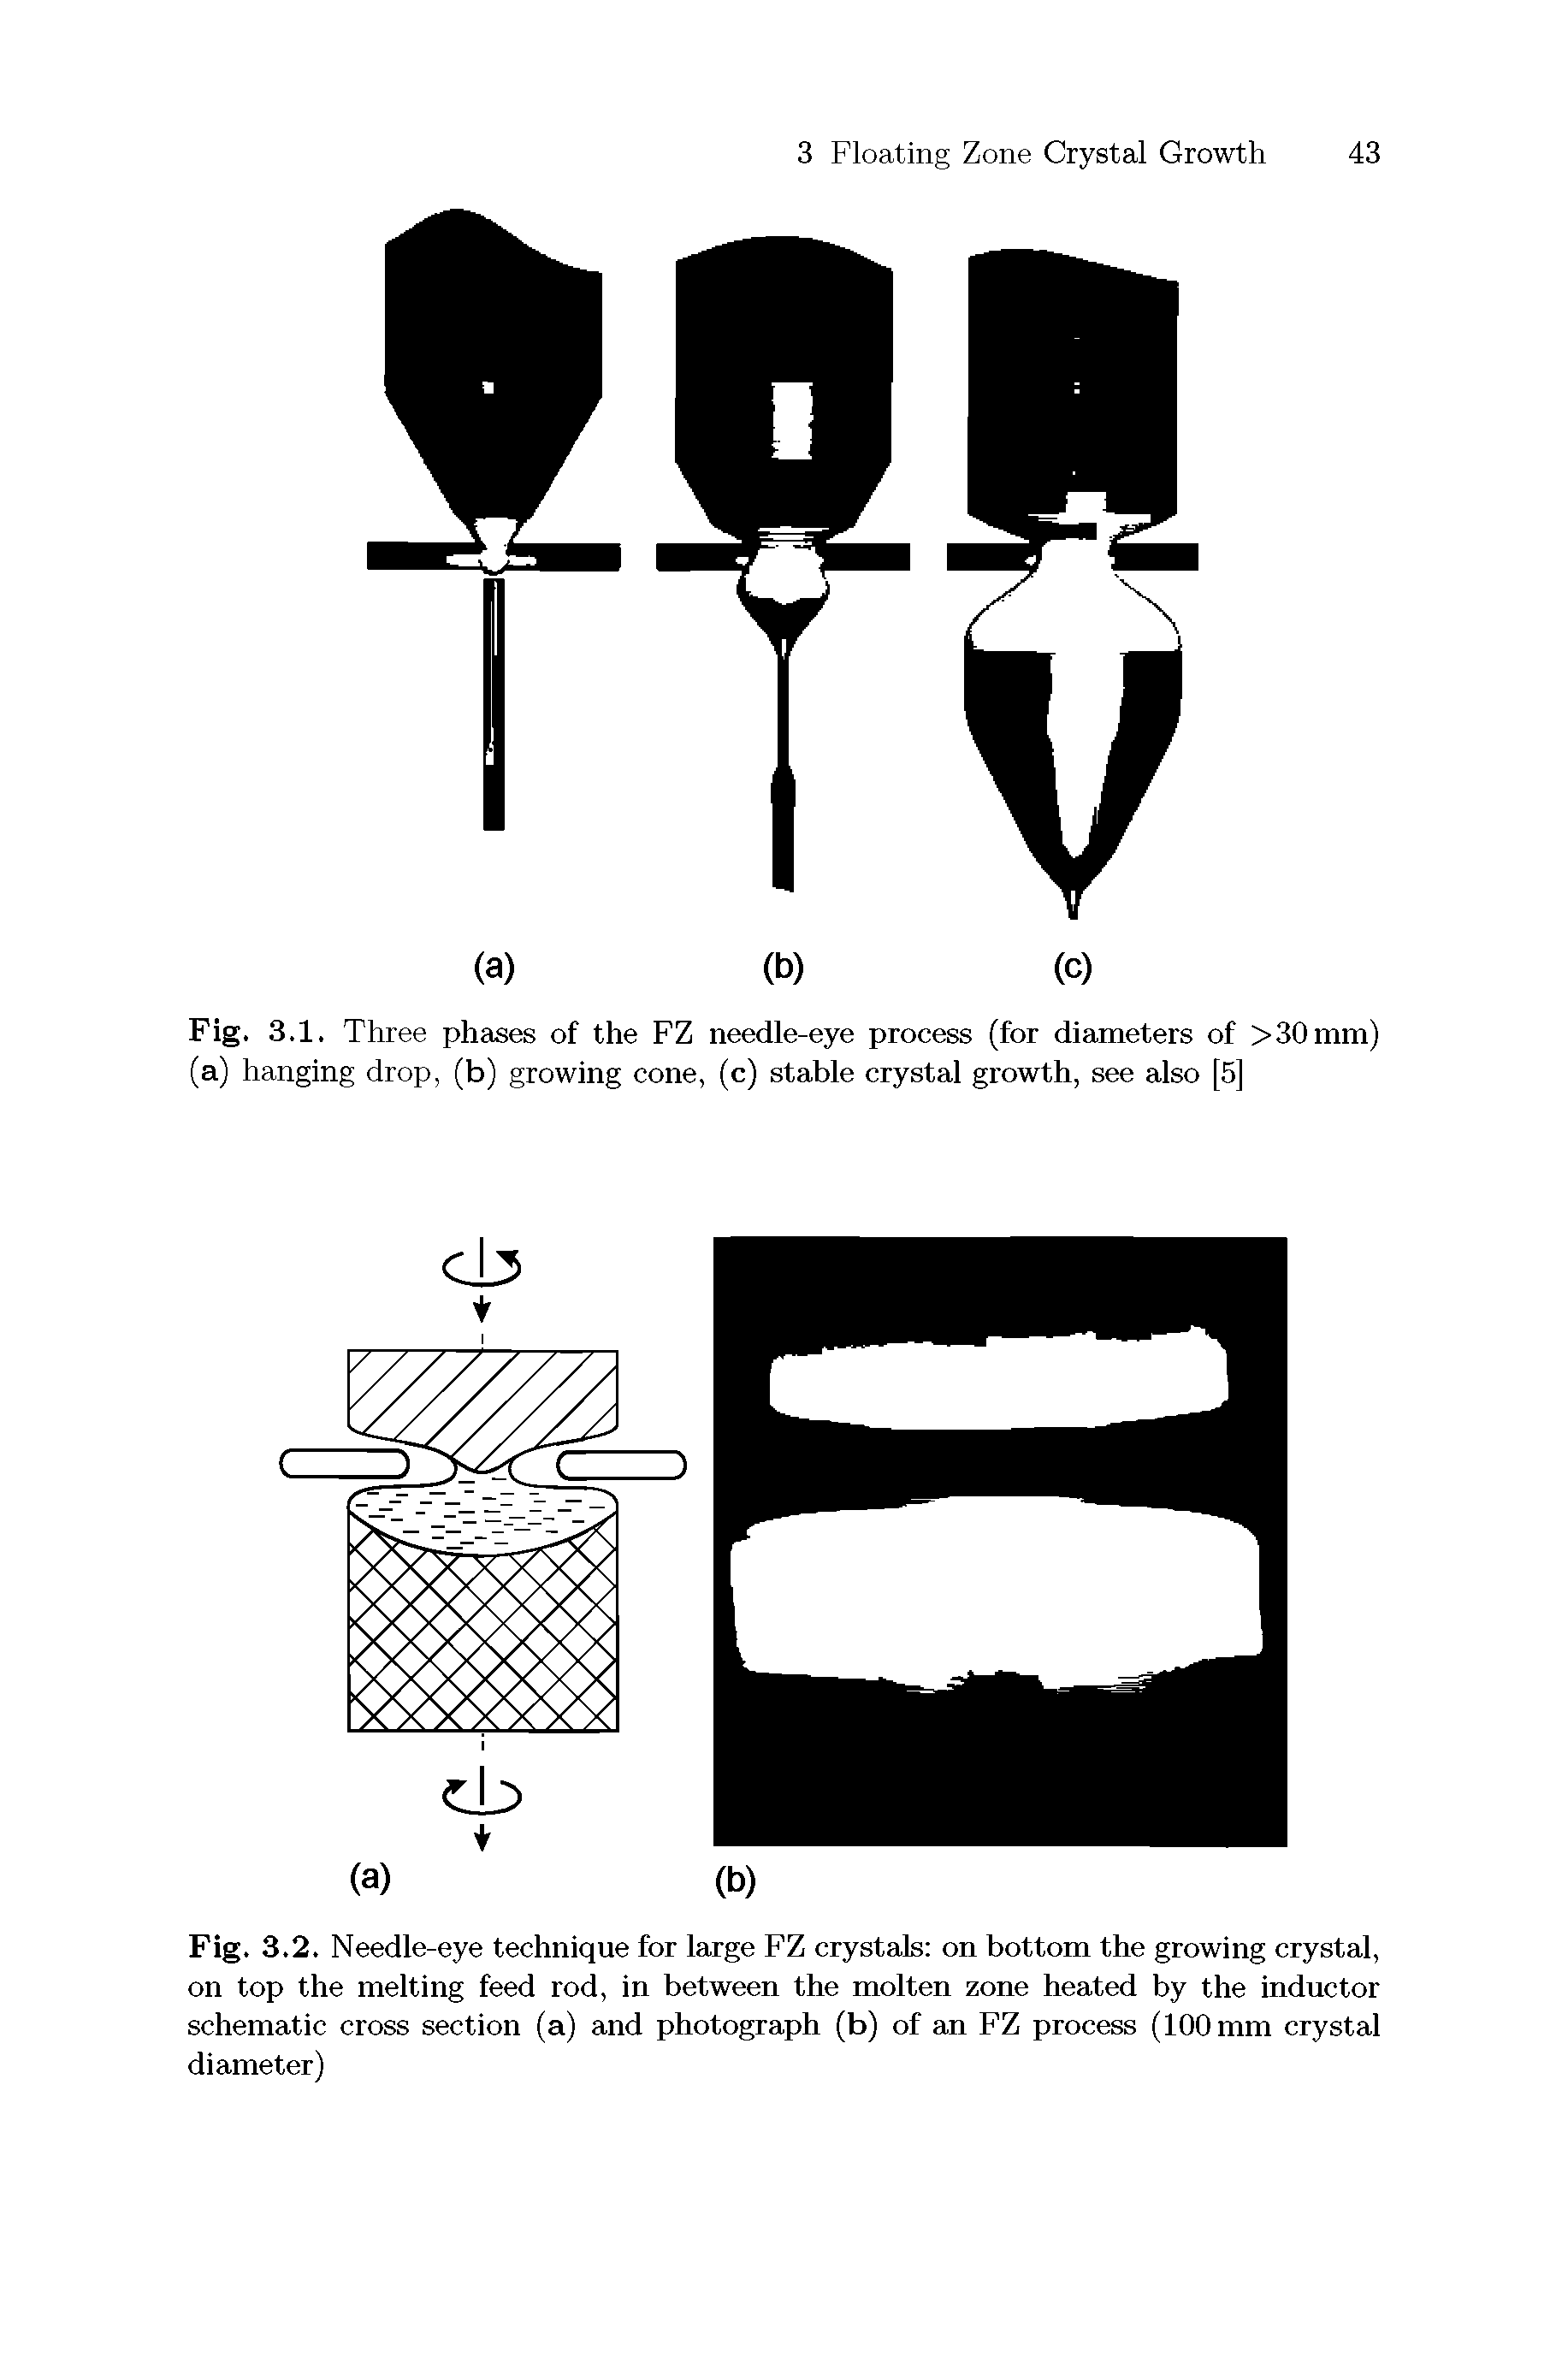 Fig. 3.2. Needle-eye technique for large FZ crystals on bottom the growing crystal, on top the melting feed rod, in between the molten zone heated by the inductor schematic cross section (a) and photograph (b) of an FZ process (100 mm crystal diameter)...